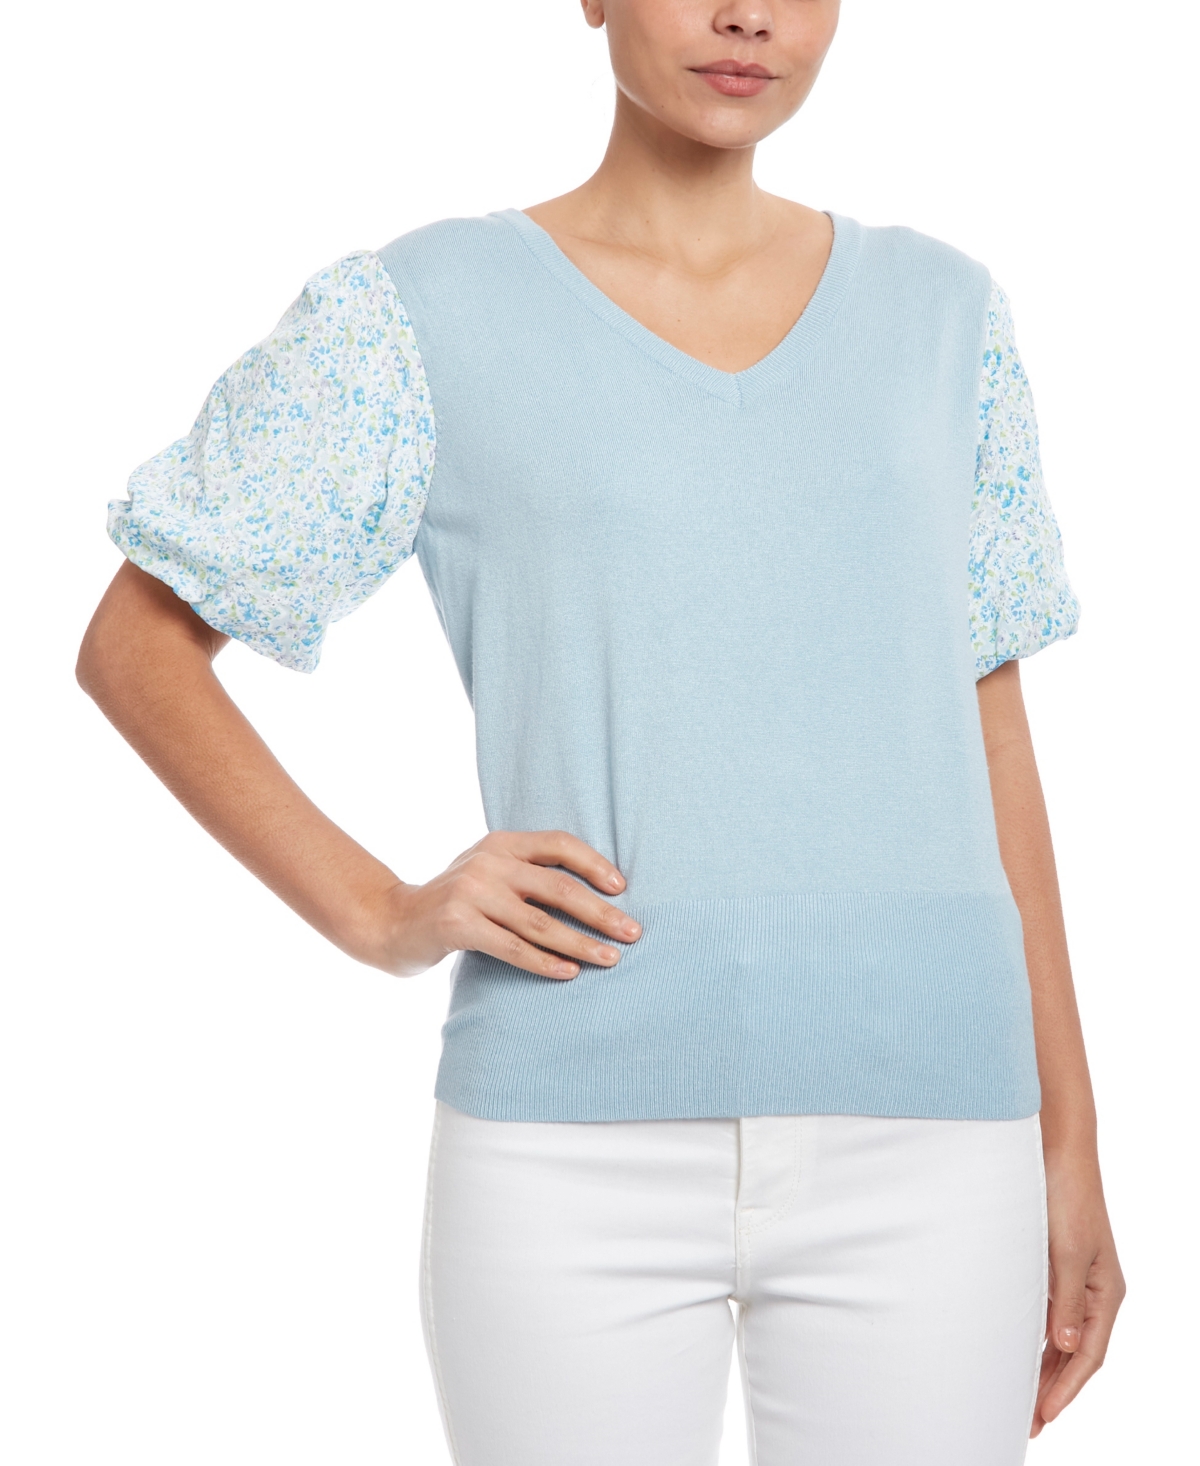 Joseph A Women's Sweater with Floral Eyelet